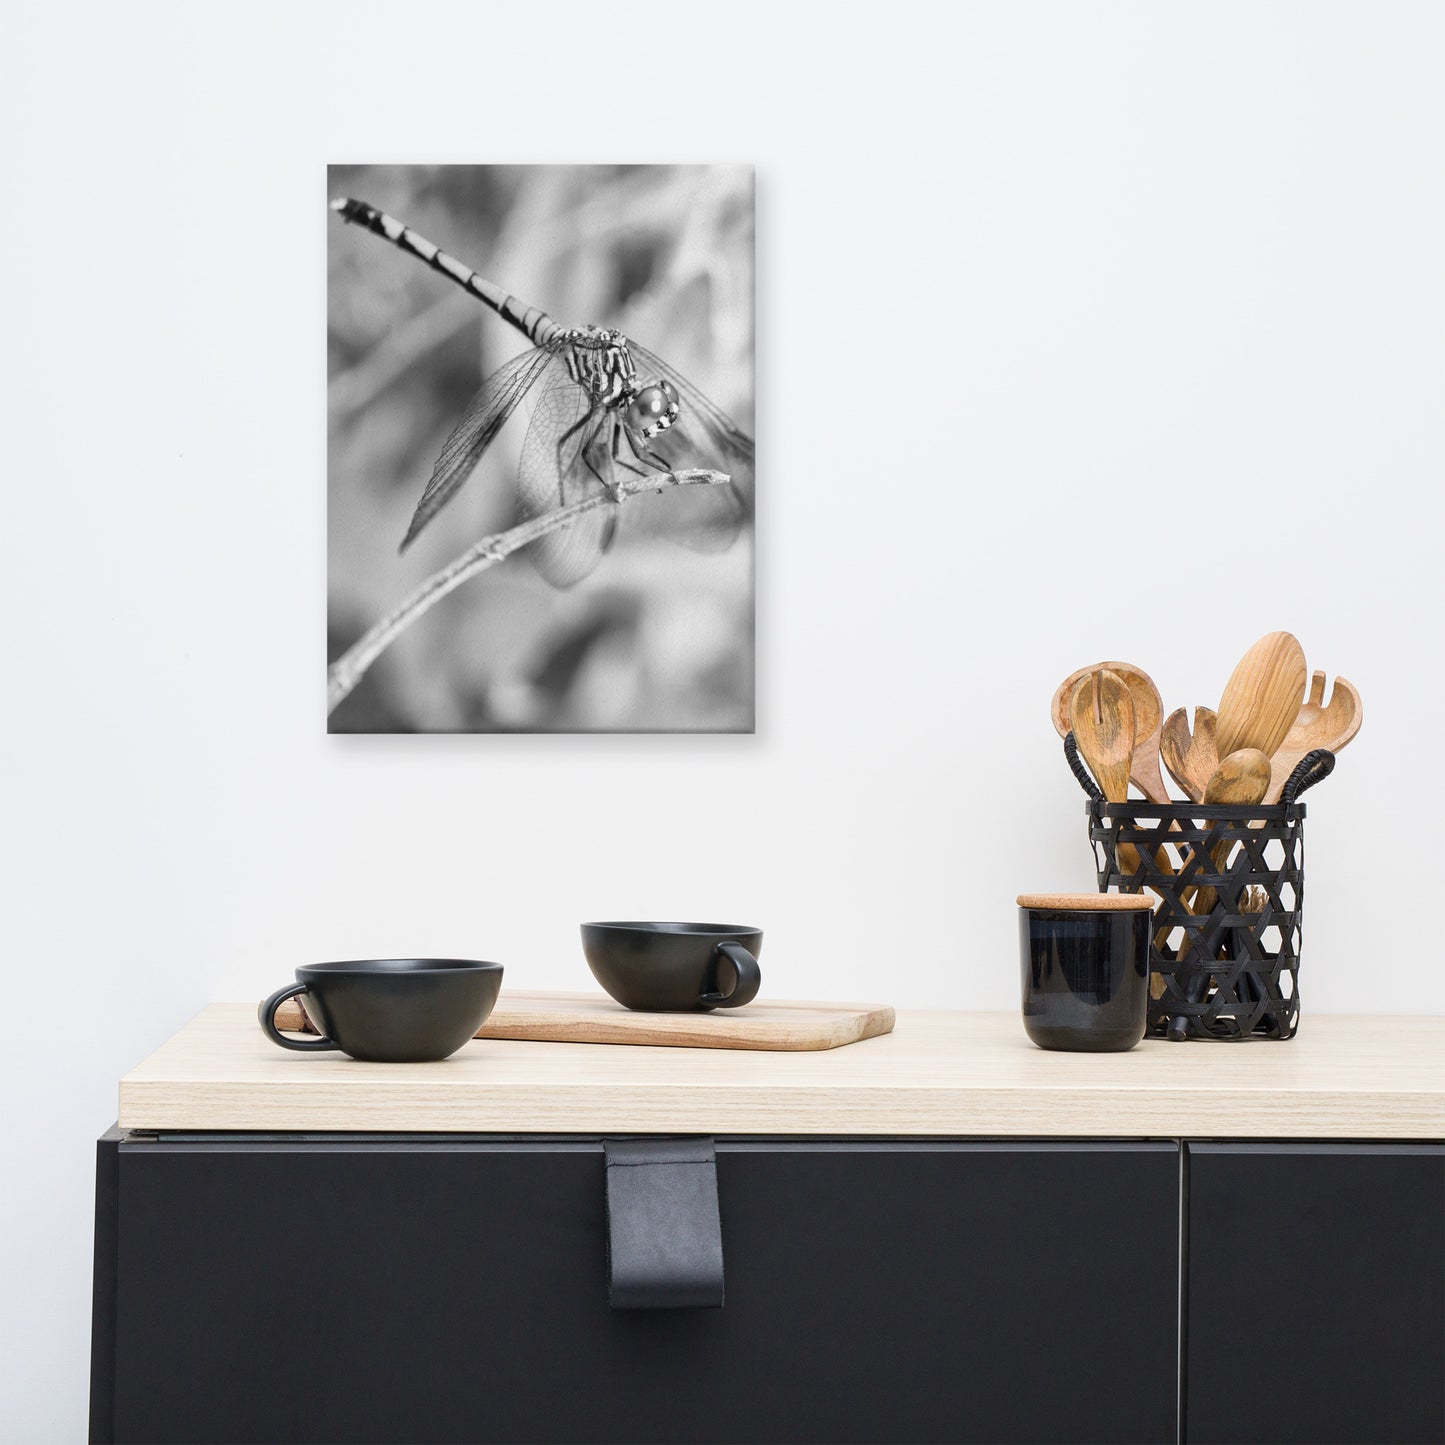 Dragonfly in Black and White Animal / Wildlife Photograph Canvas Wall Art Prints